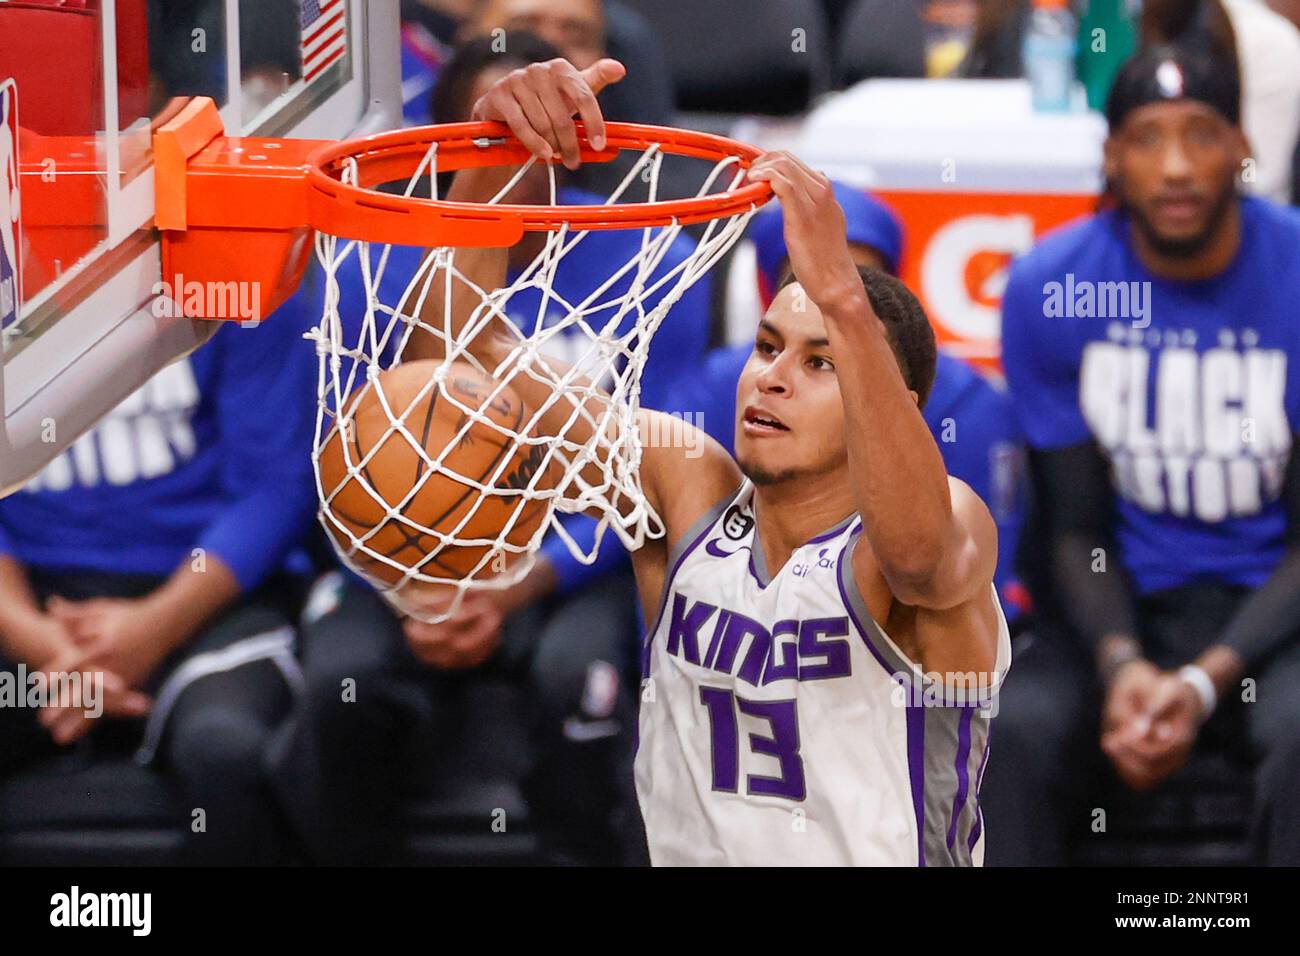 Los Angeles, United States. 24th Feb, 2023. Sacramento Kings forward Keegan Murray dunks against the Los Angeles Clippers during an NBA basketball game. Kings 176:175 Clippers Credit: SOPA Images Limited/Alamy Live News Stock Photo